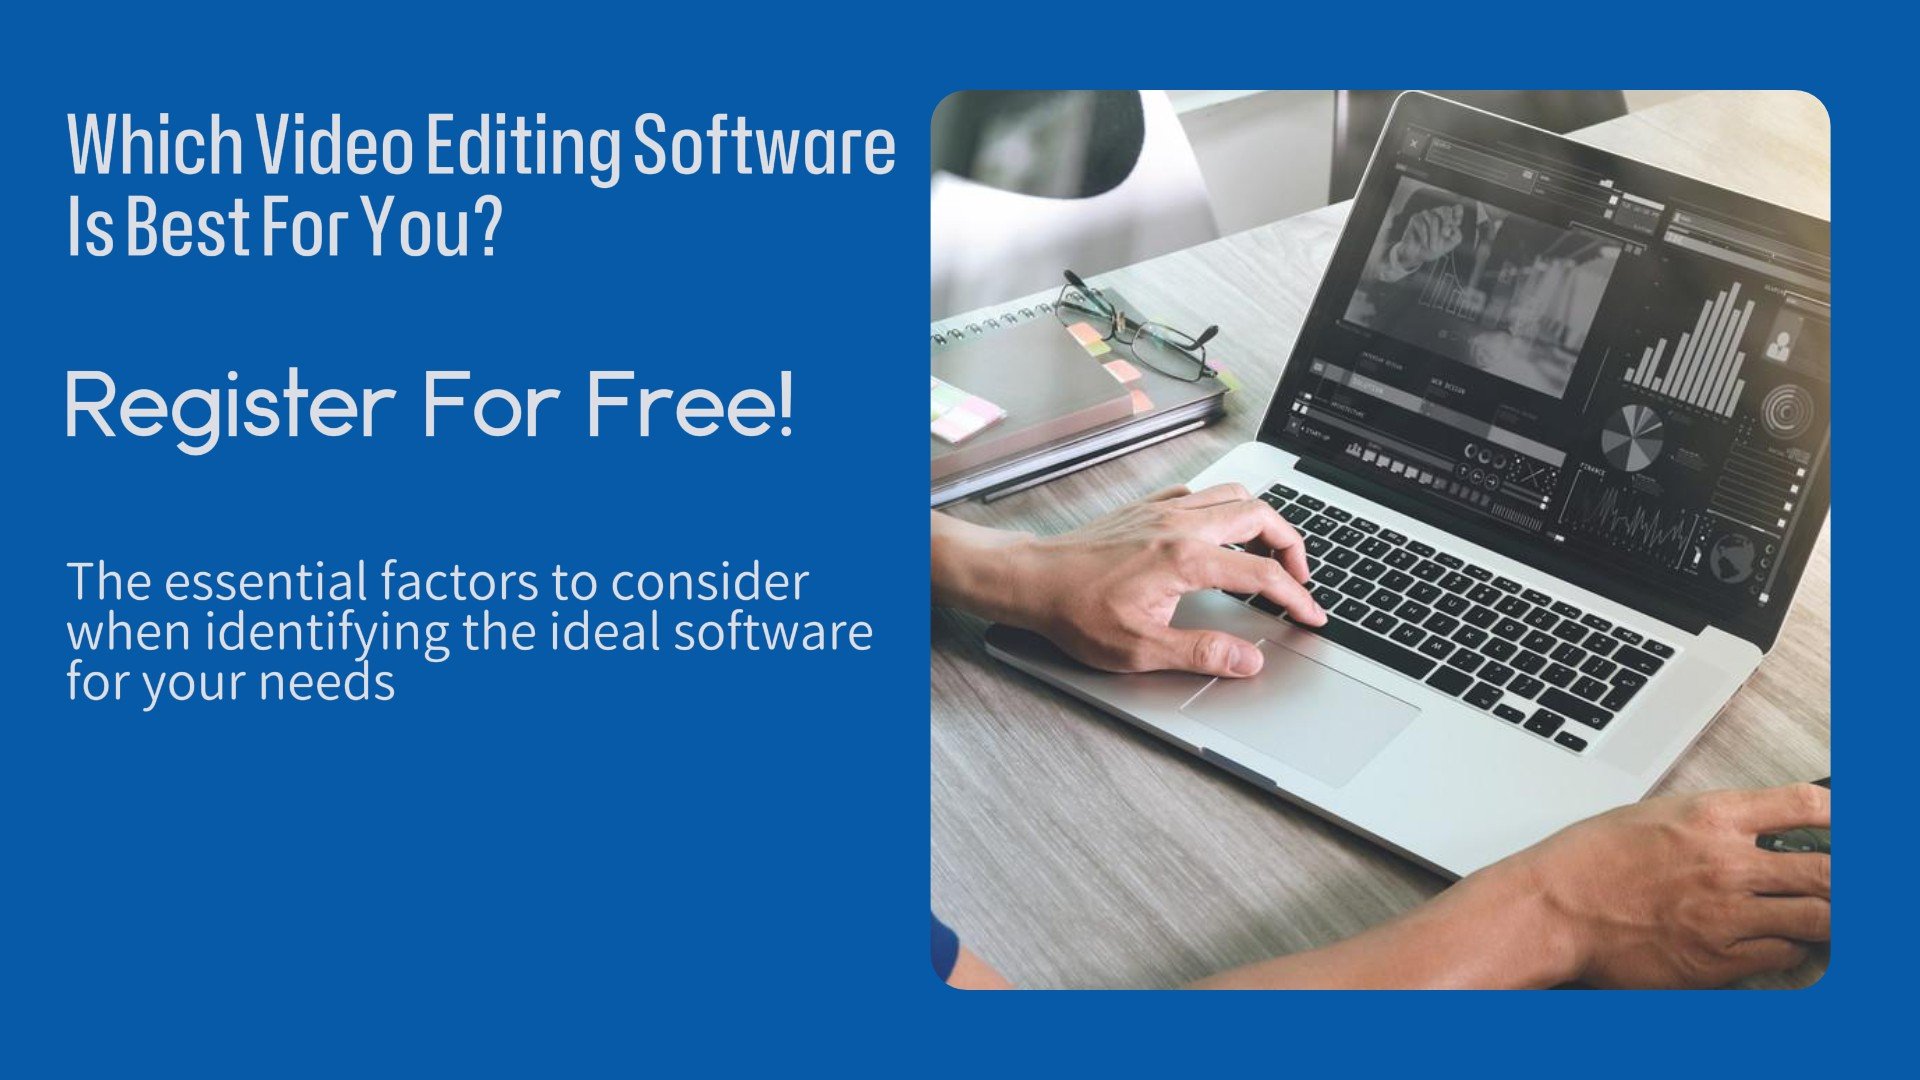 What Video Editing Software is Best For You Webinar - FREE